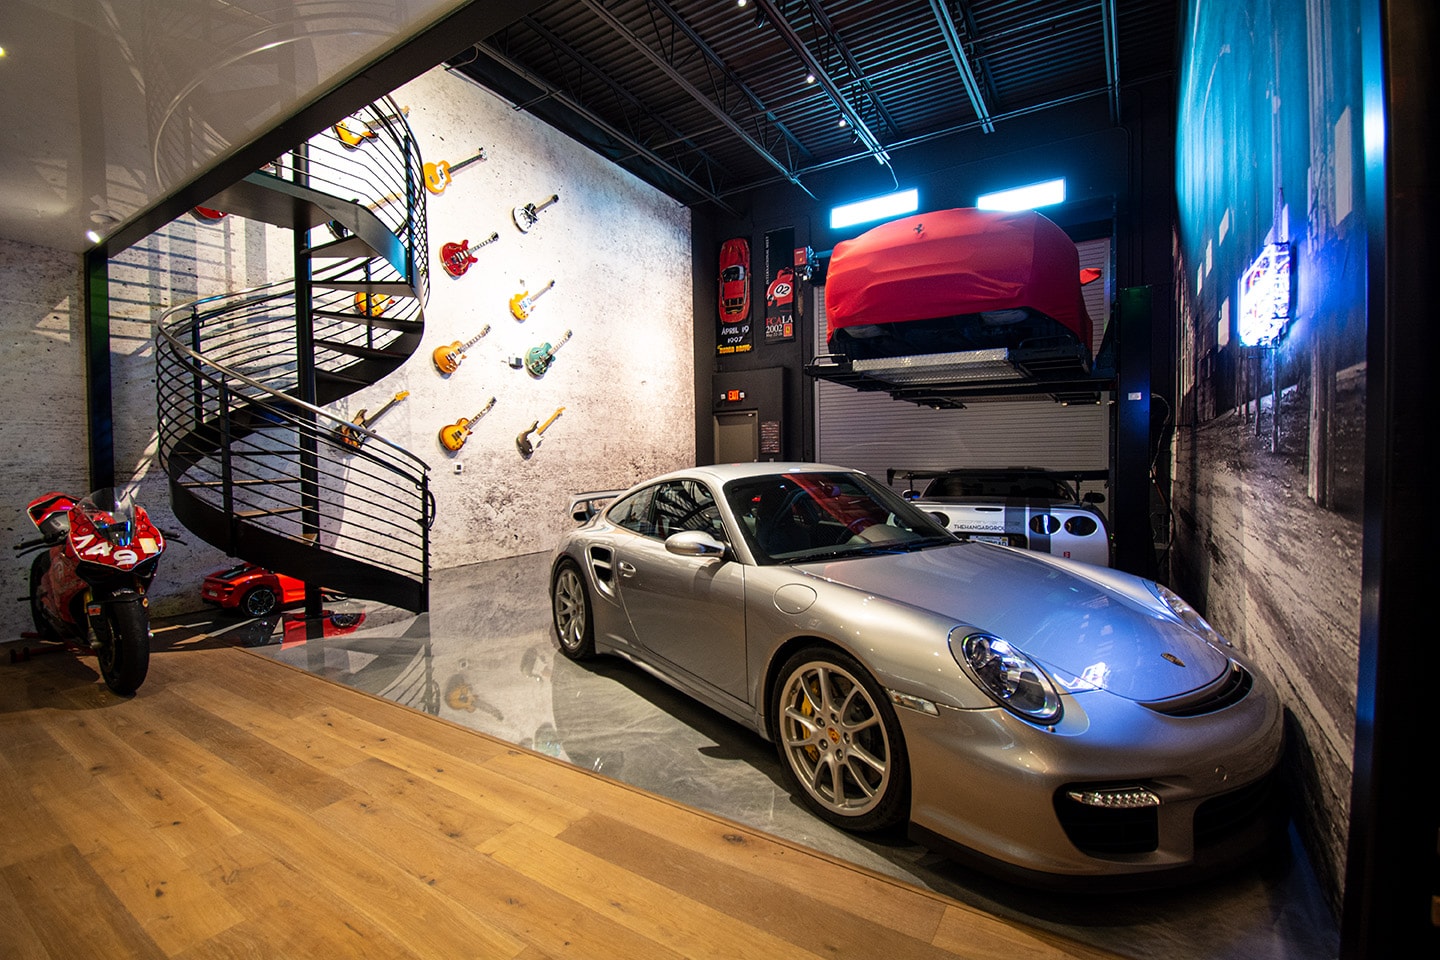 Buy a Home for Your Cars at The Hangar, A New Class of Luxury Real